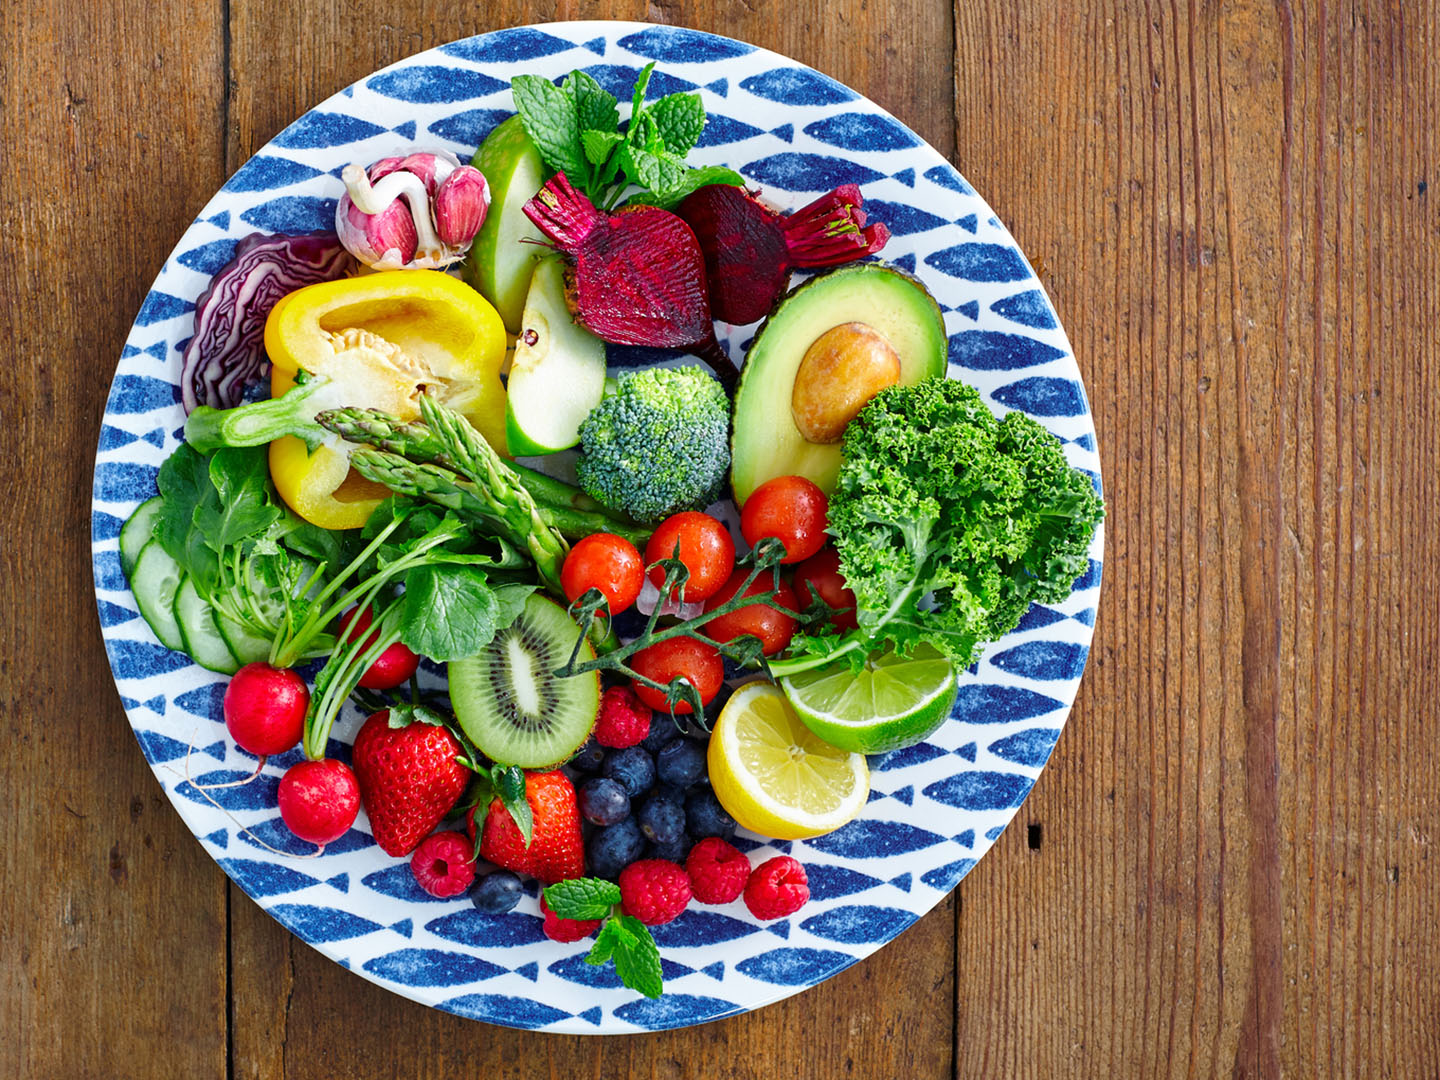 How To Start On A Raw Food Diet - Economicsprogress5